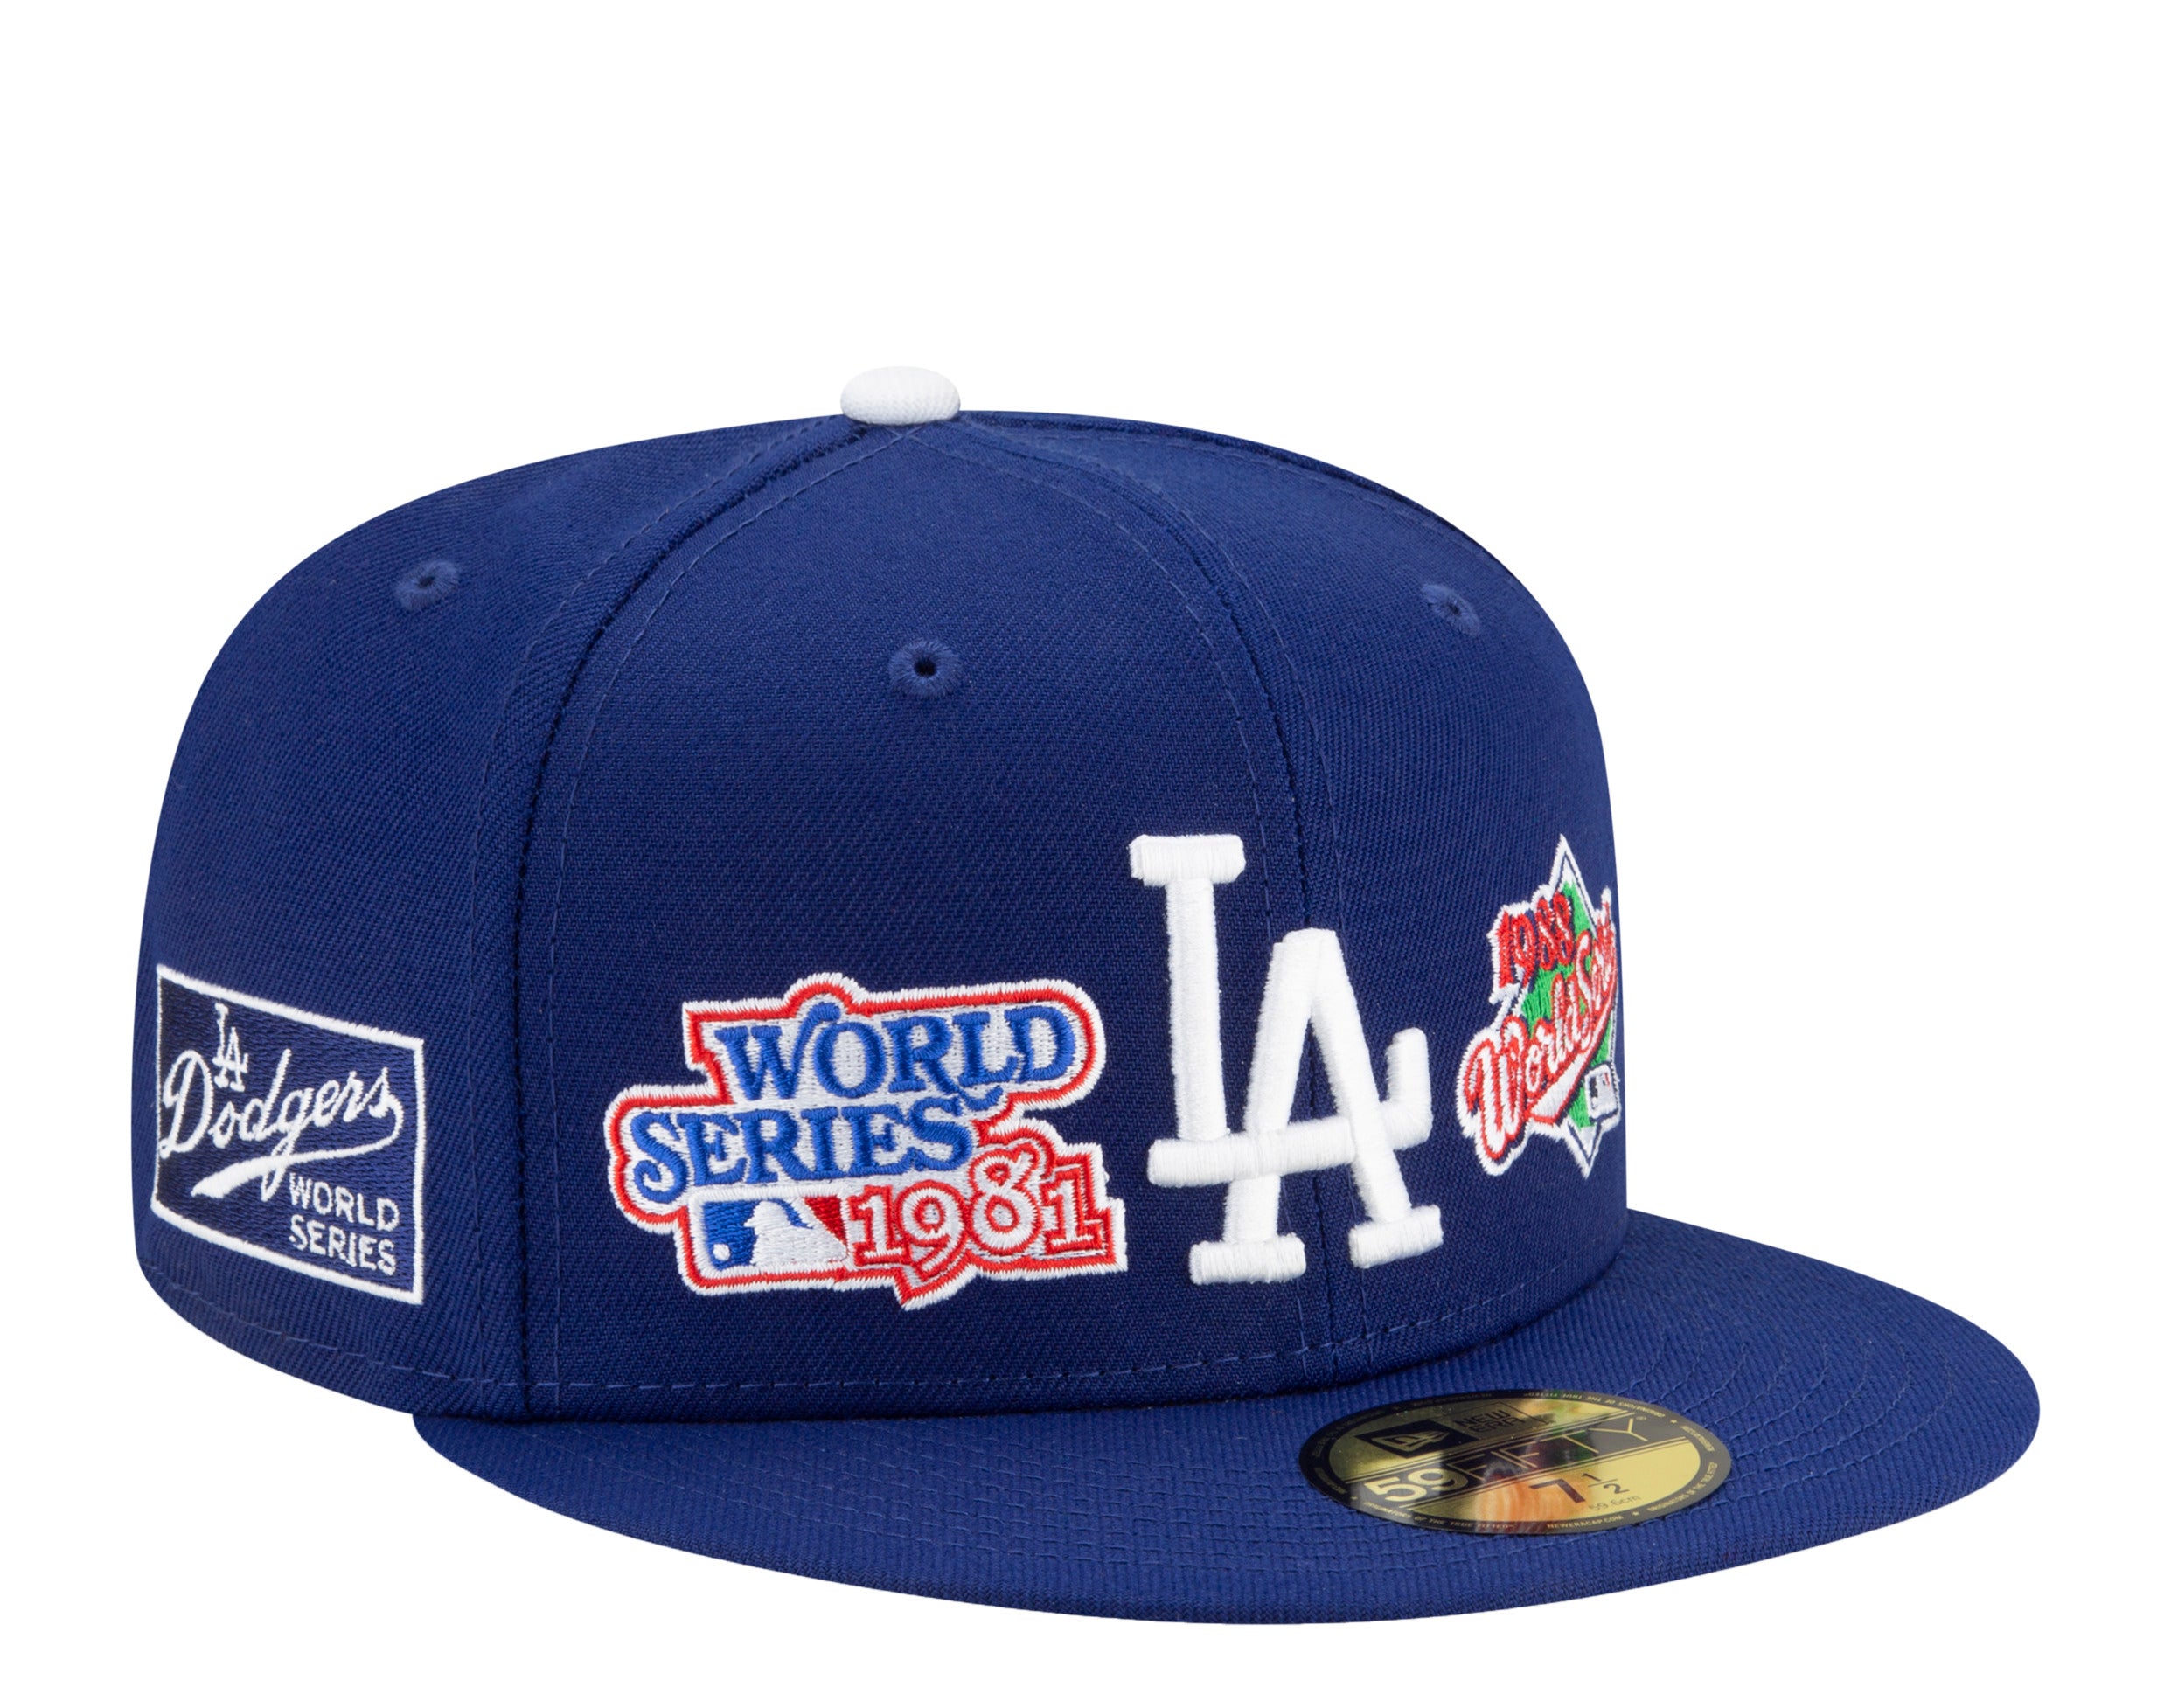 2020 Champions Los Angeles Dodgers Los Angeles Lakers 59Fifty Fitted Cap by  MLB x NBA x New Era